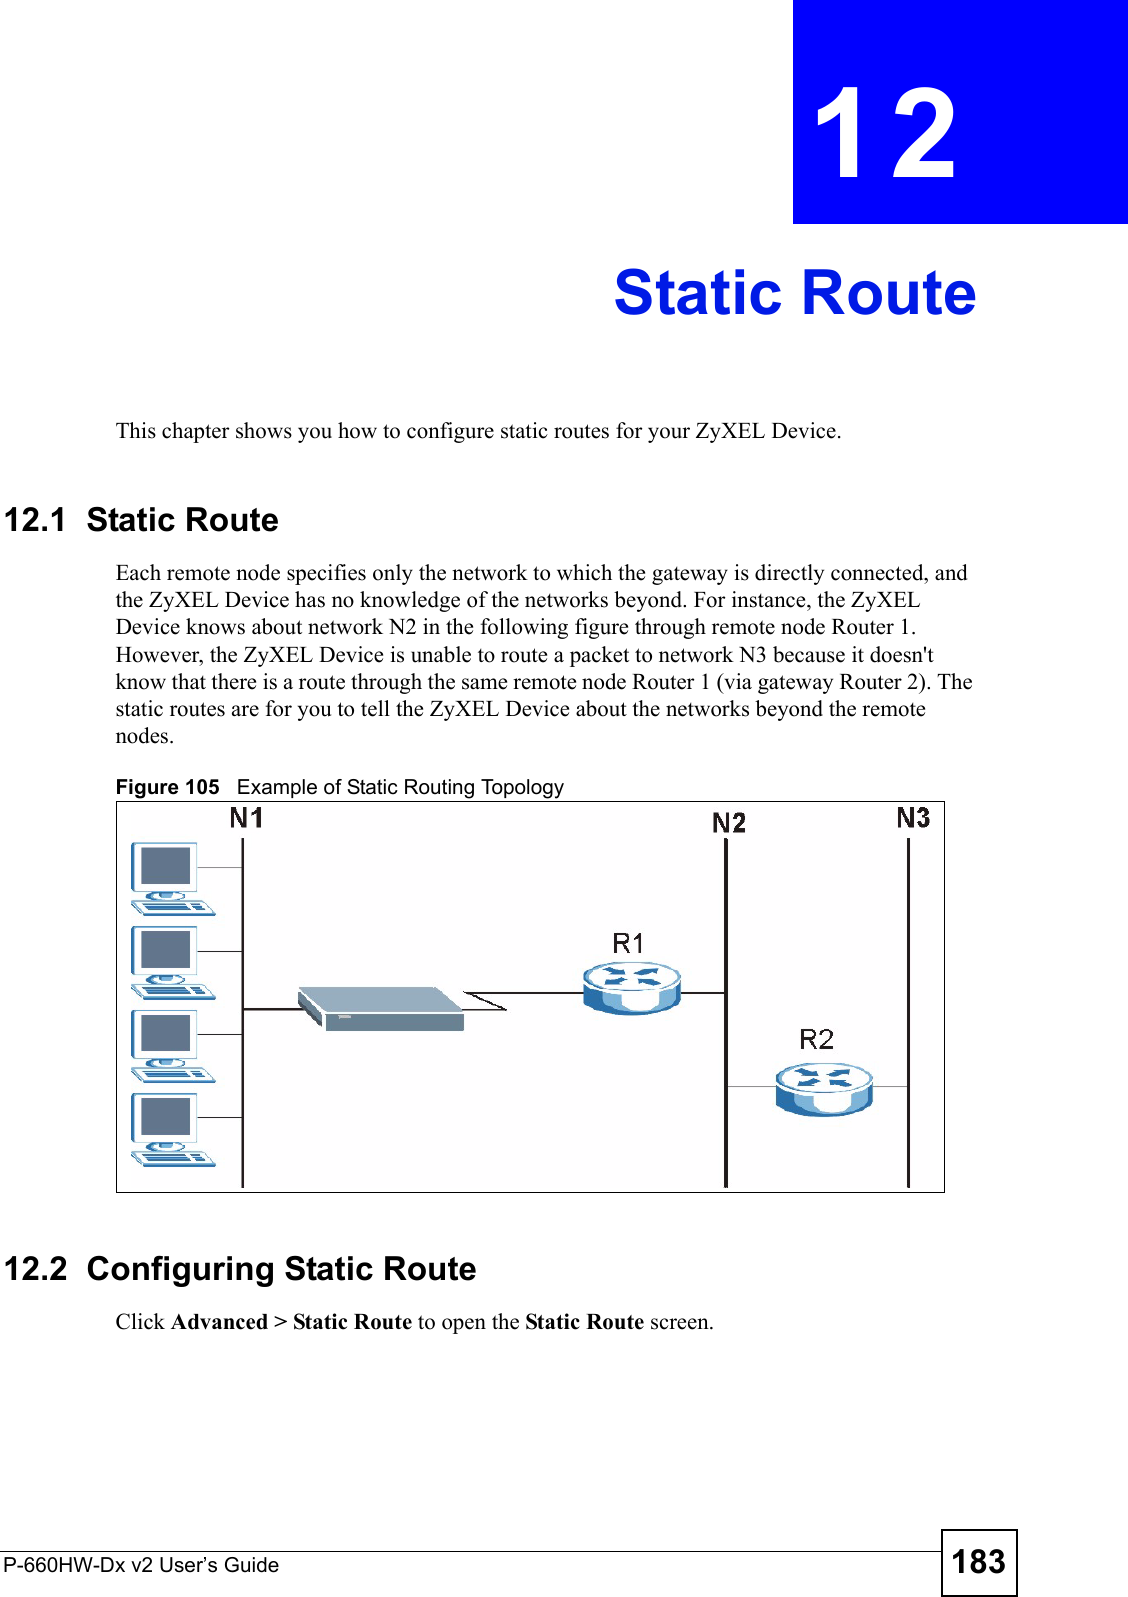 P-660HW-Dx v2 User’s Guide 183CHAPTER  12 Static RouteThis chapter shows you how to configure static routes for your ZyXEL Device.12.1  Static Route   Each remote node specifies only the network to which the gateway is directly connected, and the ZyXEL Device has no knowledge of the networks beyond. For instance, the ZyXEL Device knows about network N2 in the following figure through remote node Router 1. However, the ZyXEL Device is unable to route a packet to network N3 because it doesn&apos;t know that there is a route through the same remote node Router 1 (via gateway Router 2). The static routes are for you to tell the ZyXEL Device about the networks beyond the remote nodes.Figure 105   Example of Static Routing Topology12.2  Configuring Static Route Click Advanced &gt; Static Route to open the Static Route screen. 